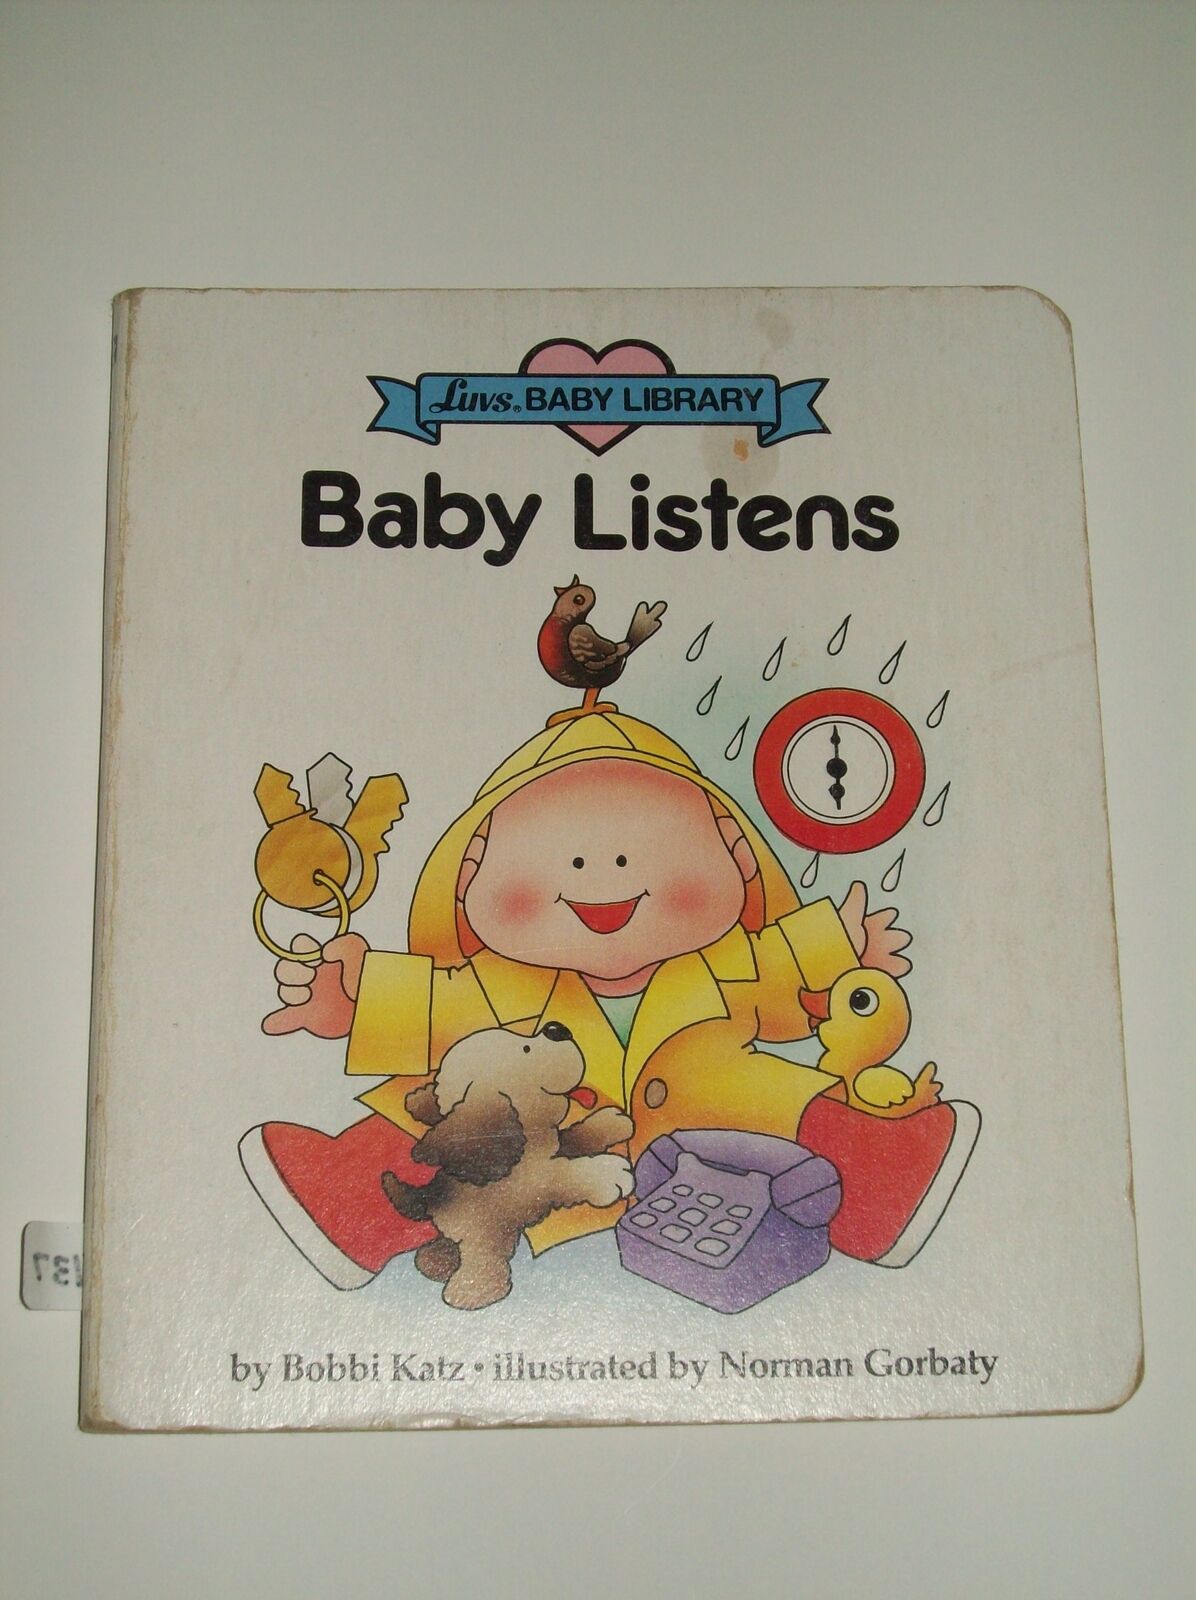 Baby listens (Luvs Baby Library)